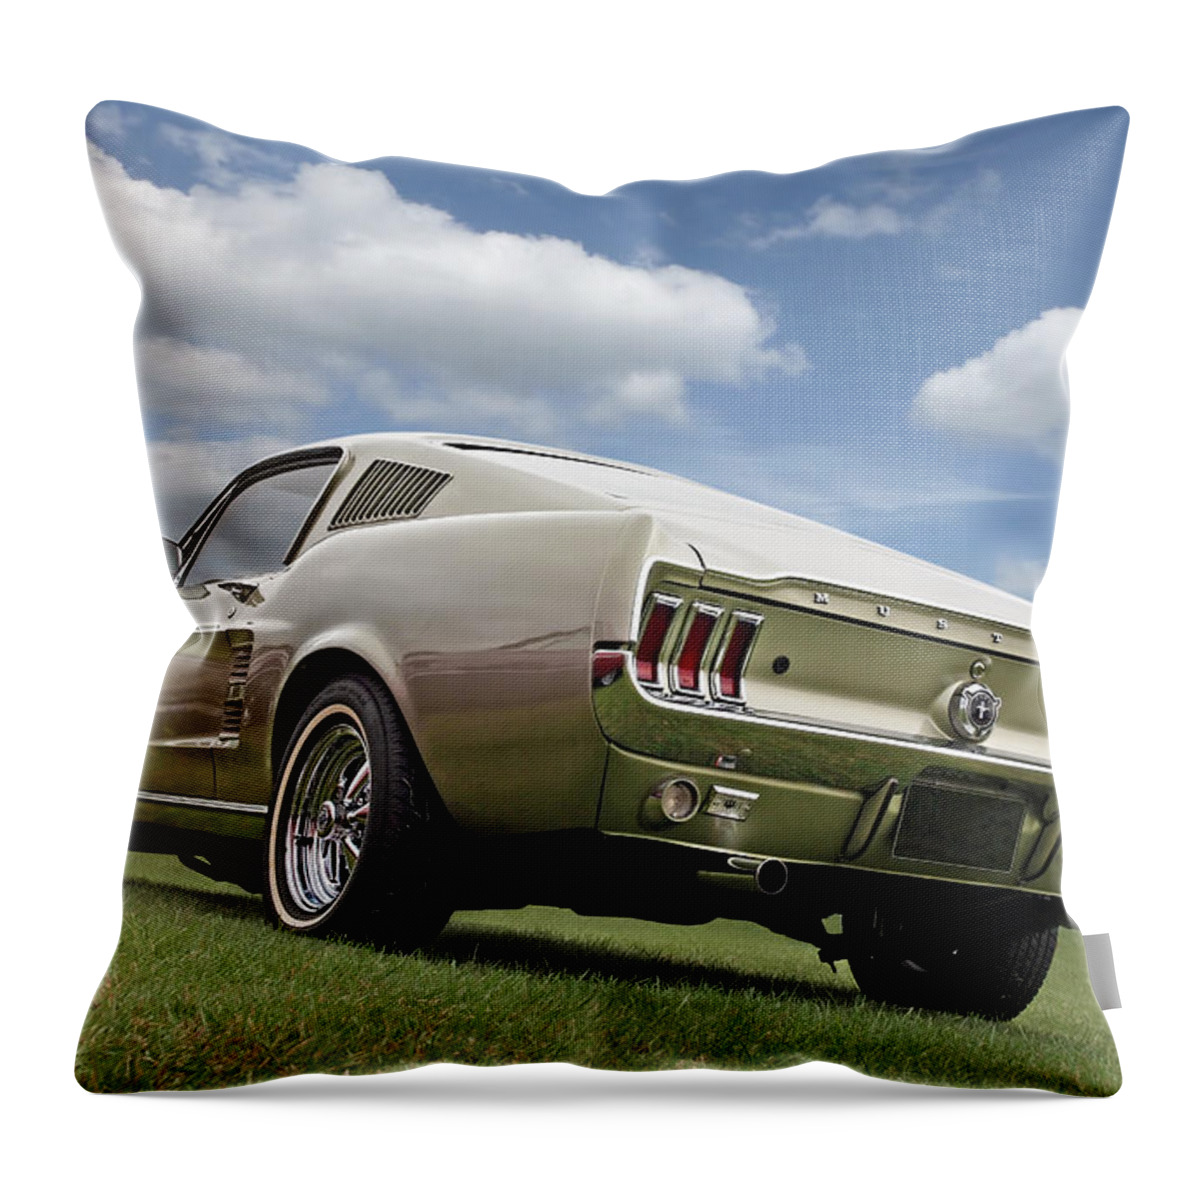 Classic Mustang Throw Pillow featuring the photograph Gold Mustang Fastback 1967 by Gill Billington